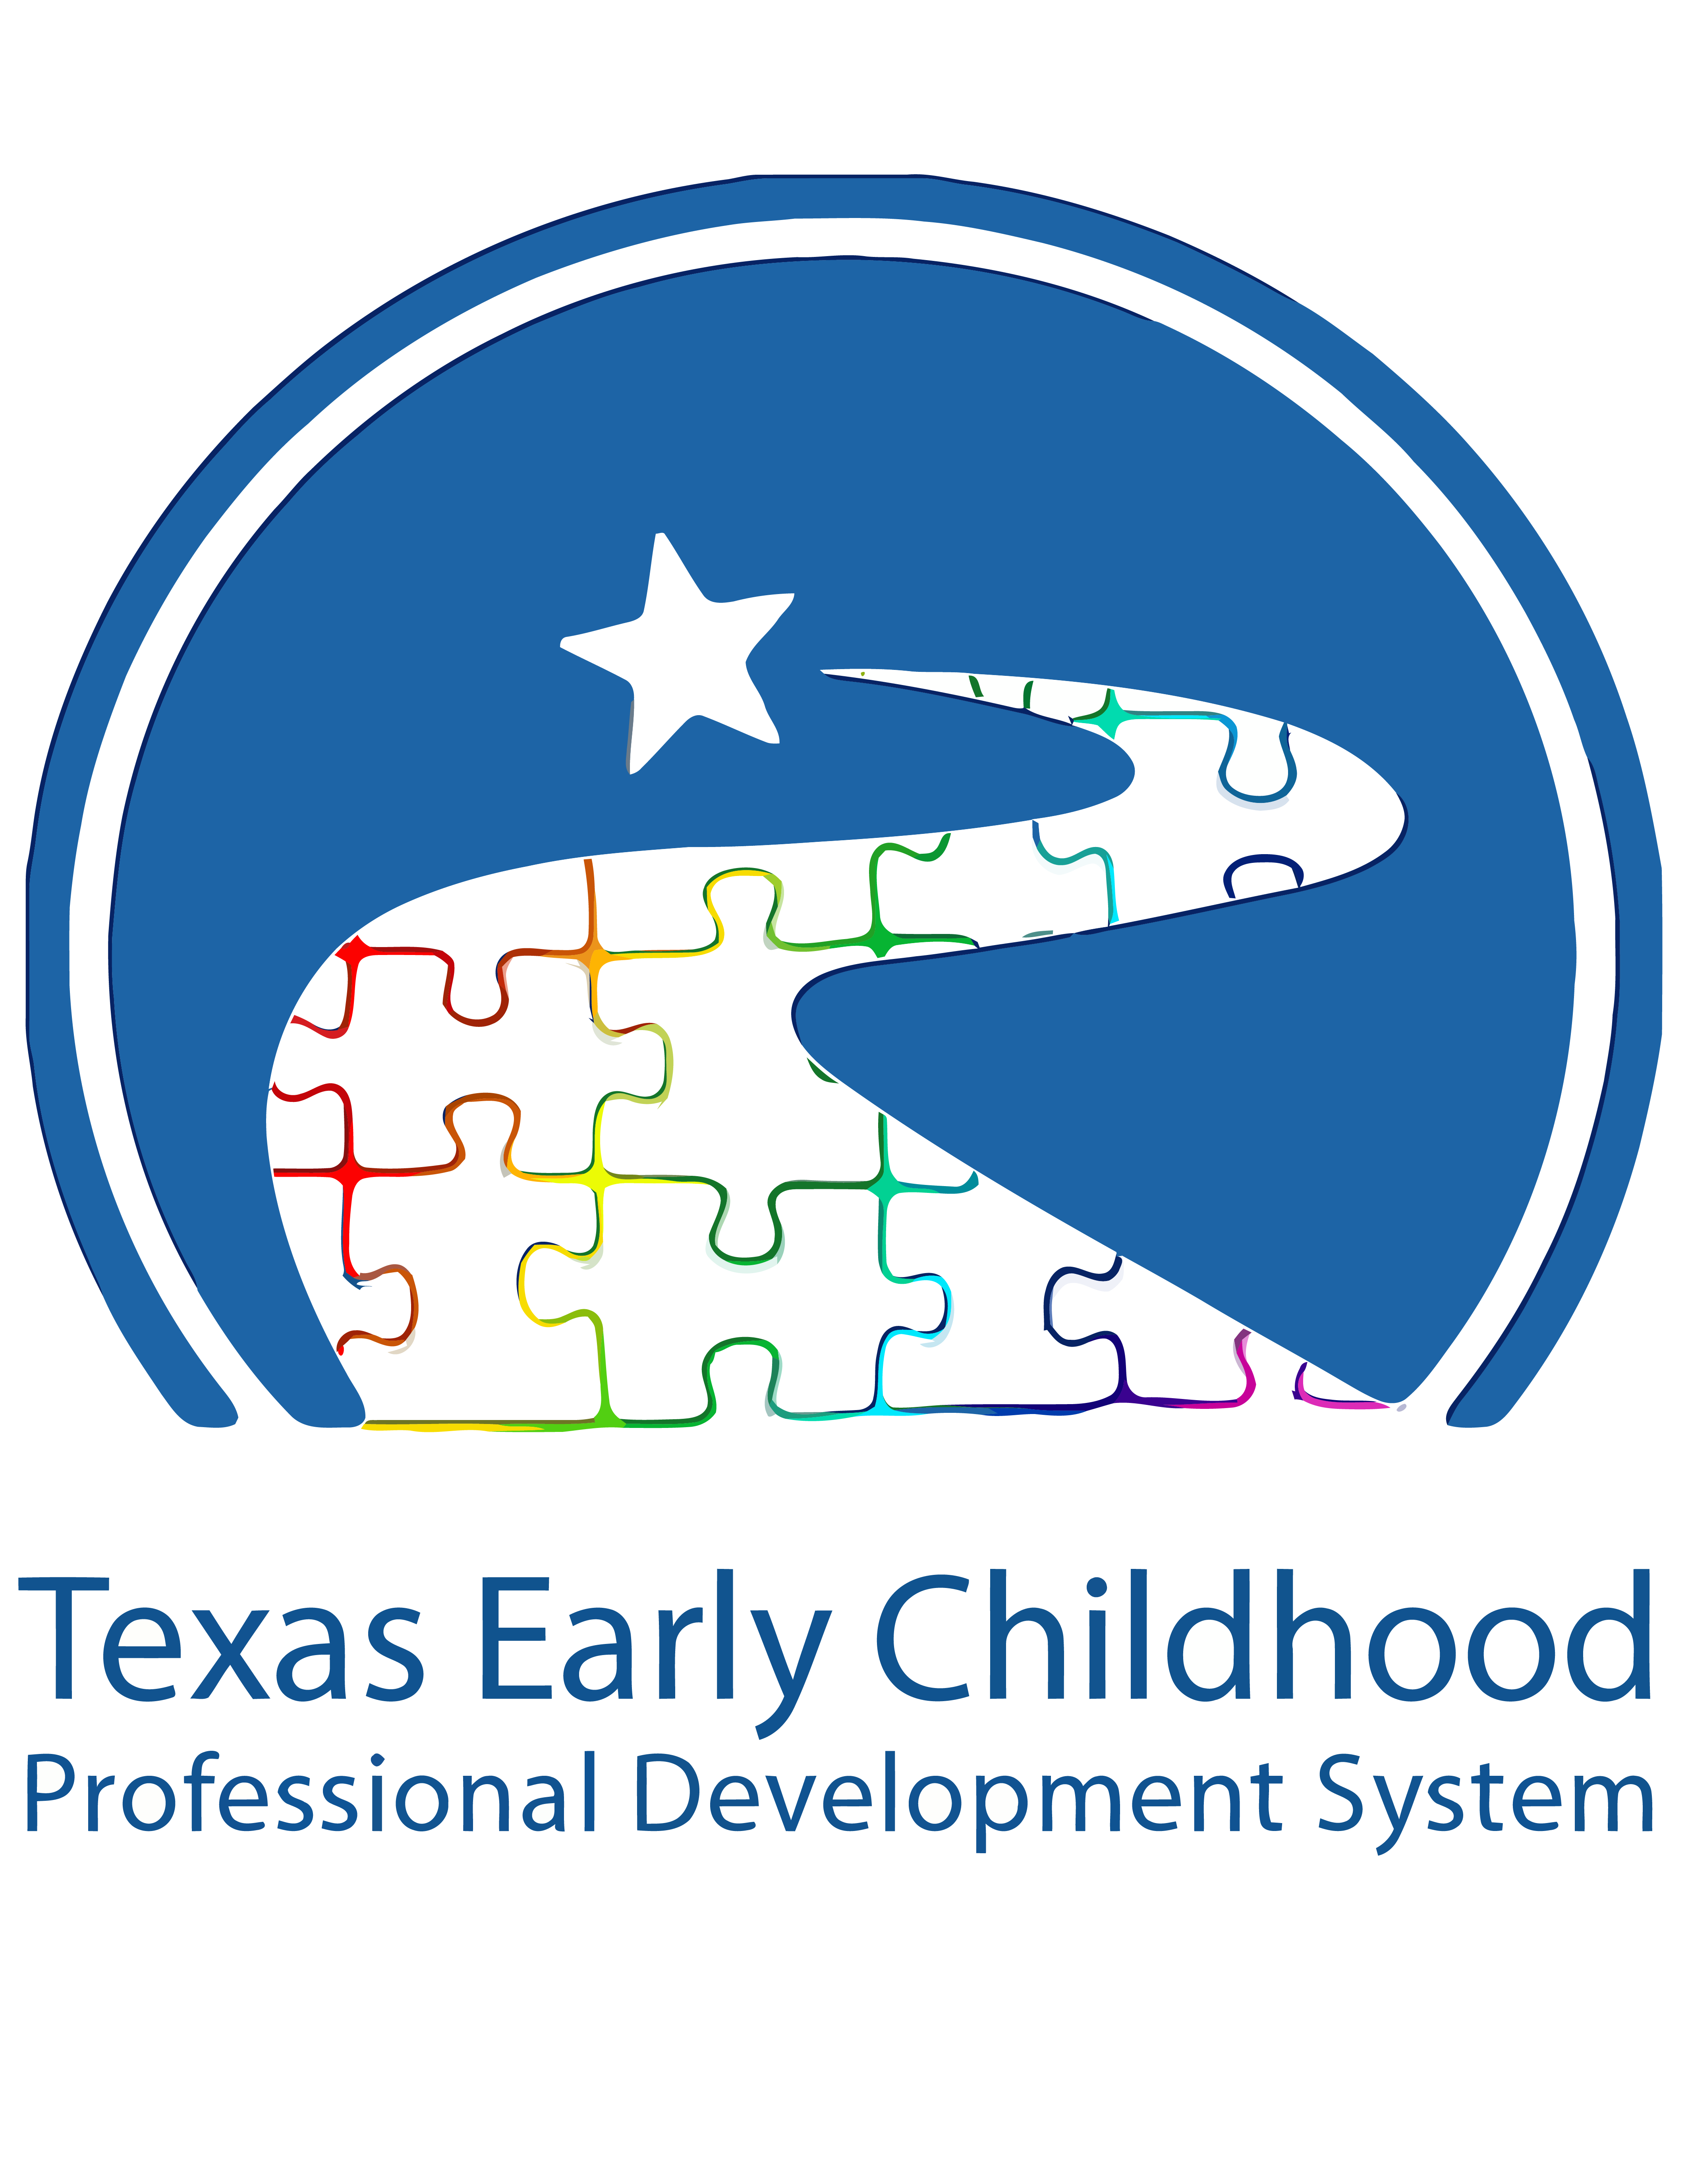 Texas Early Childhood Development System